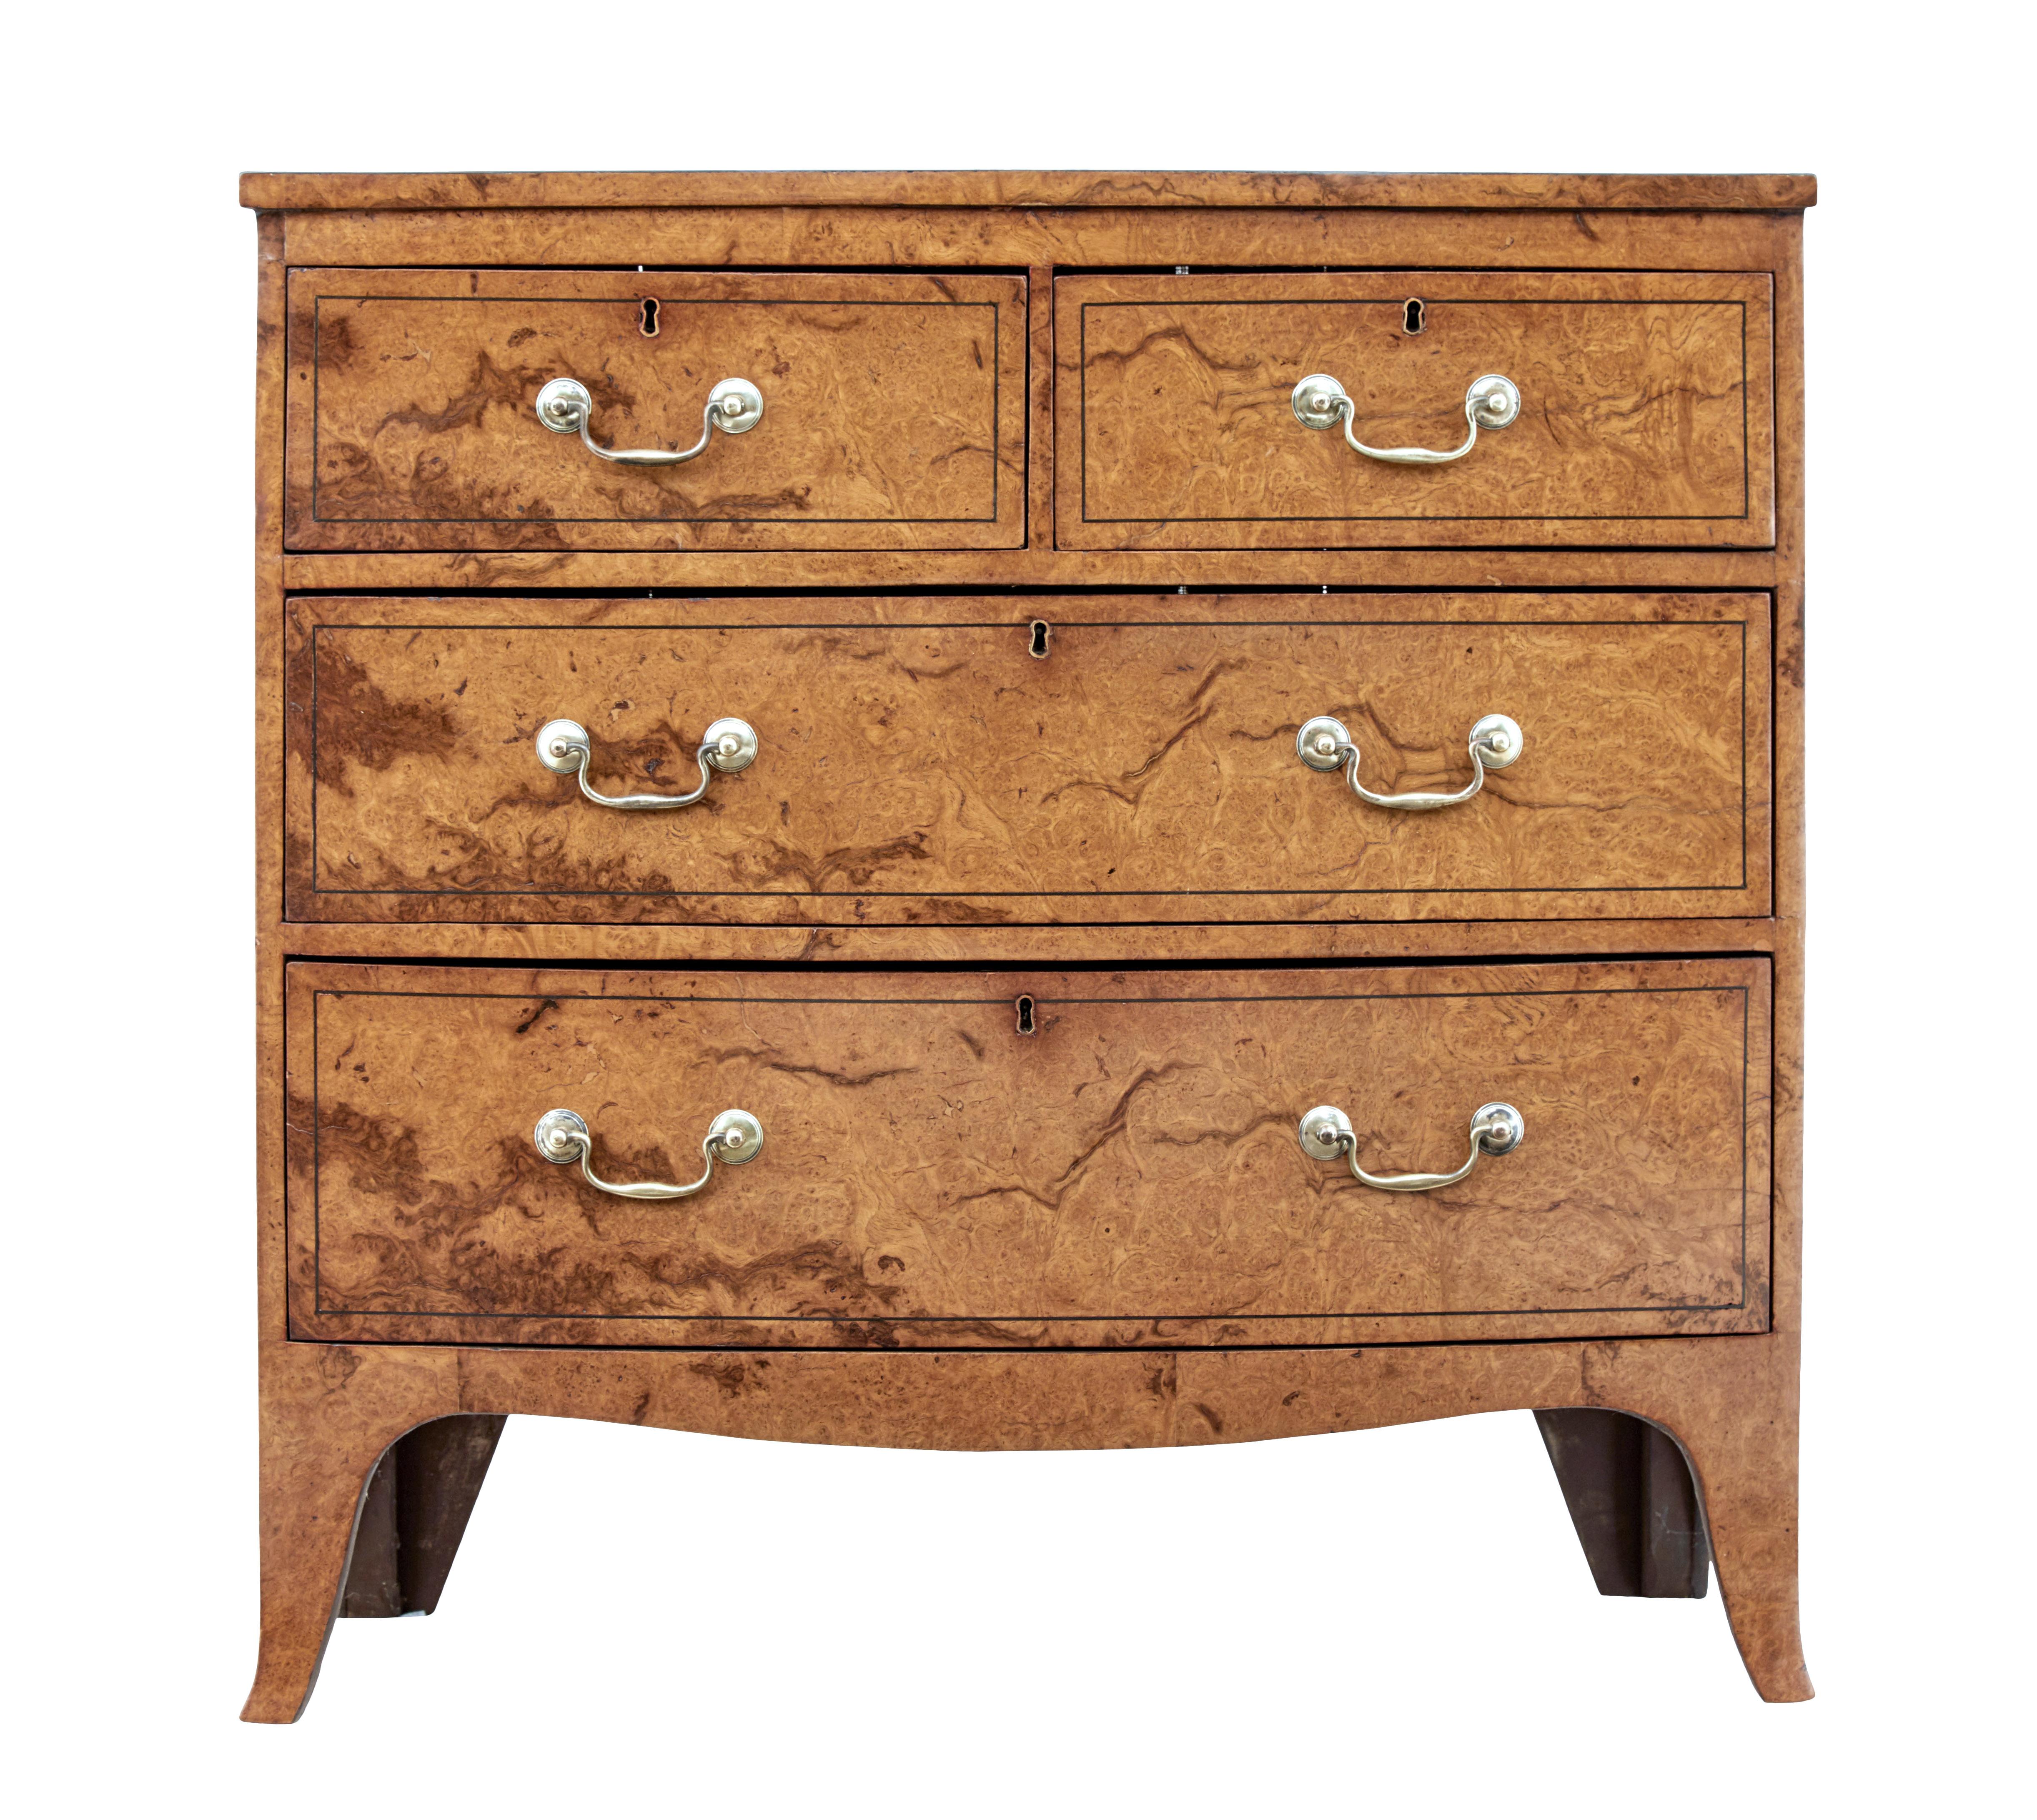 English Burr Walnut Bow Front Chest of Drawers circa 1870 with Bookmatch Veneer For Sale 1